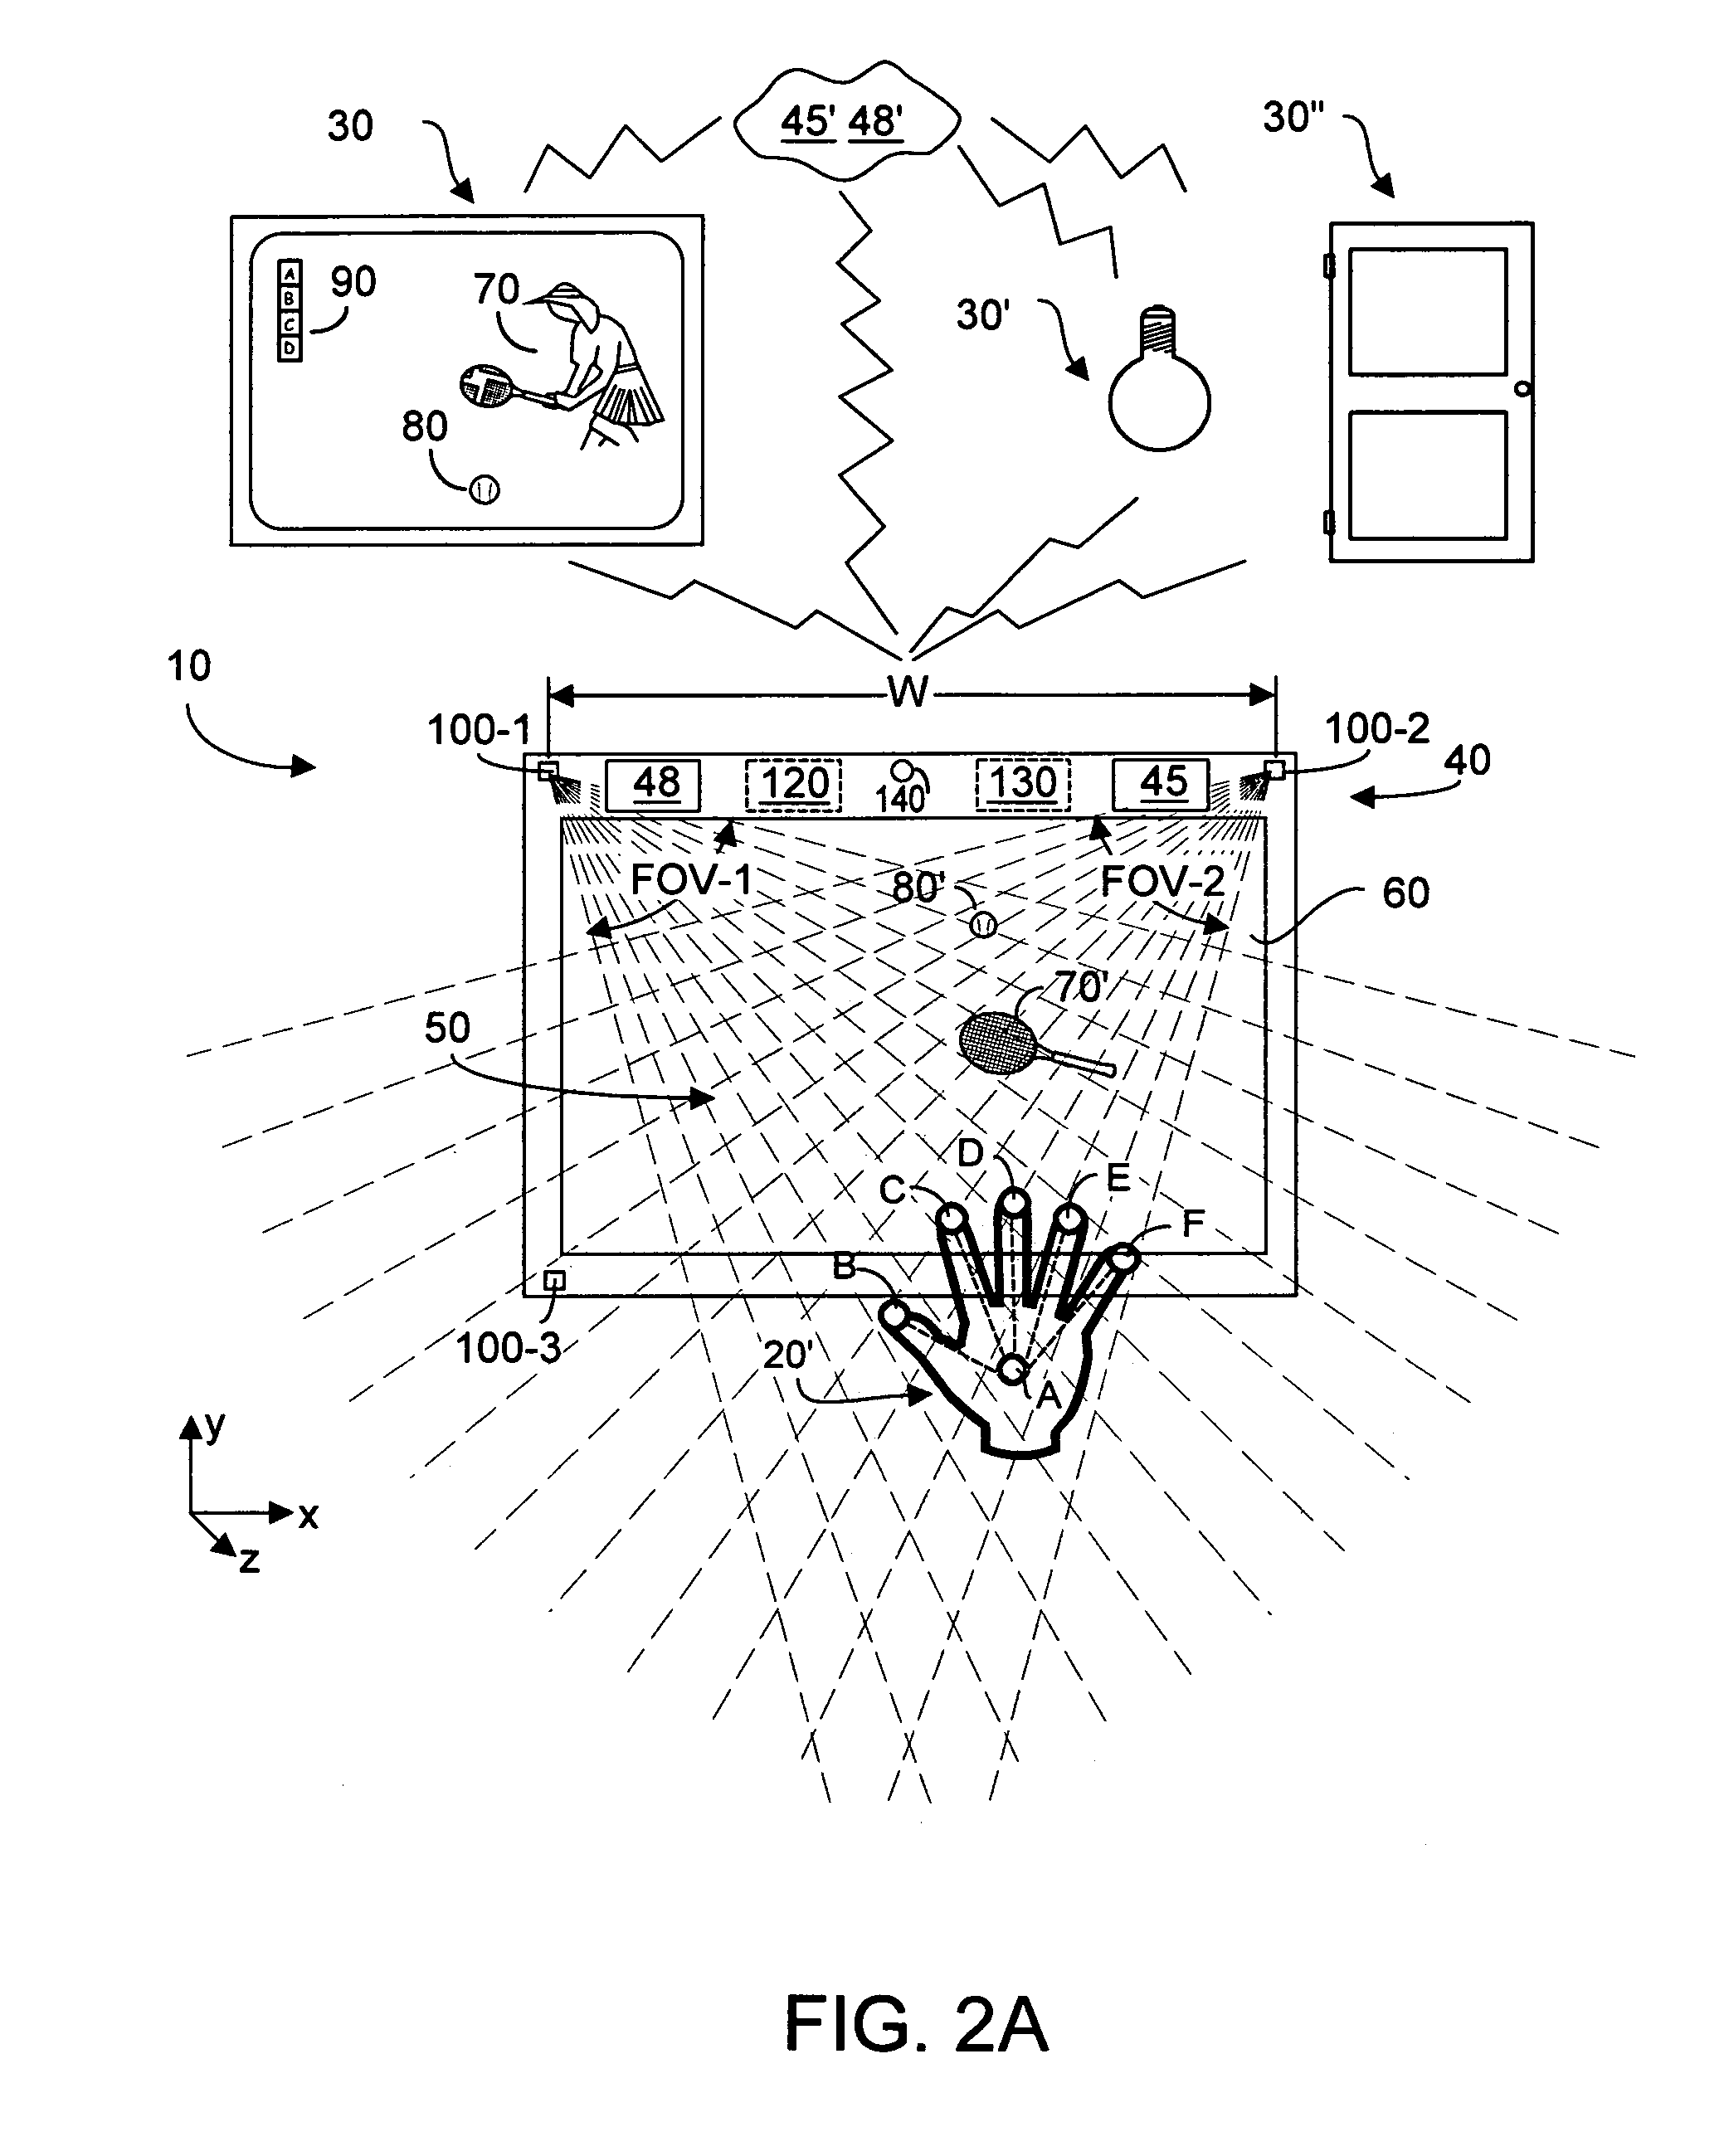 Portable remote control device enabling three-dimensional user interaction with at least one appliance